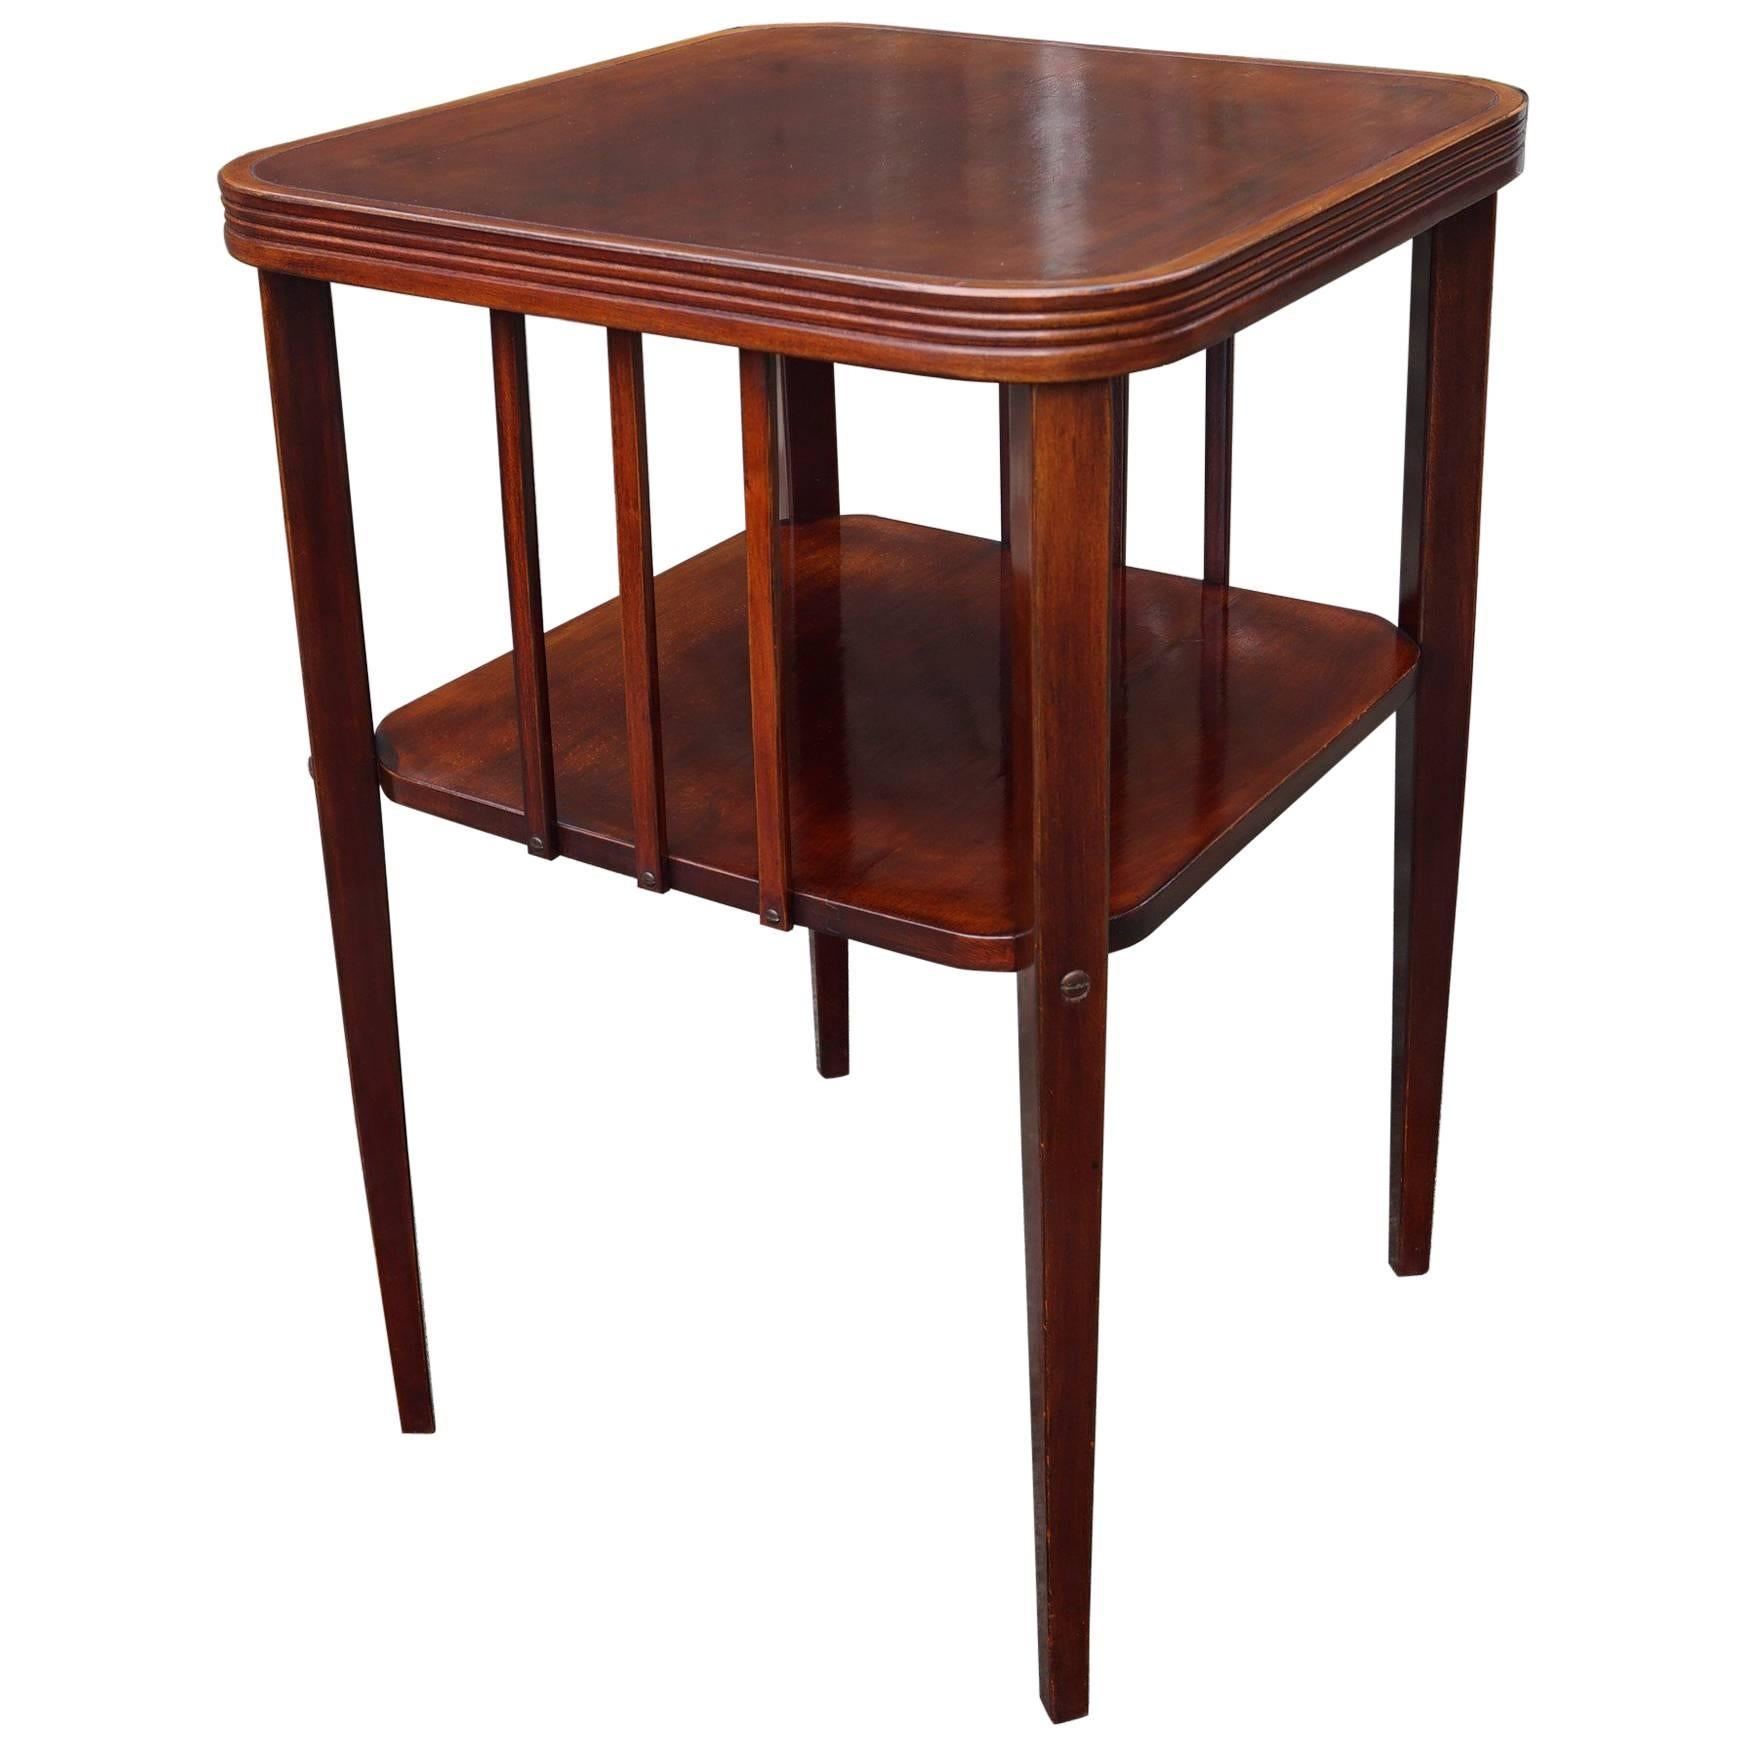 Stunning Viennese Secession Coffee, Books or End Table Wonderful Shape & Patina